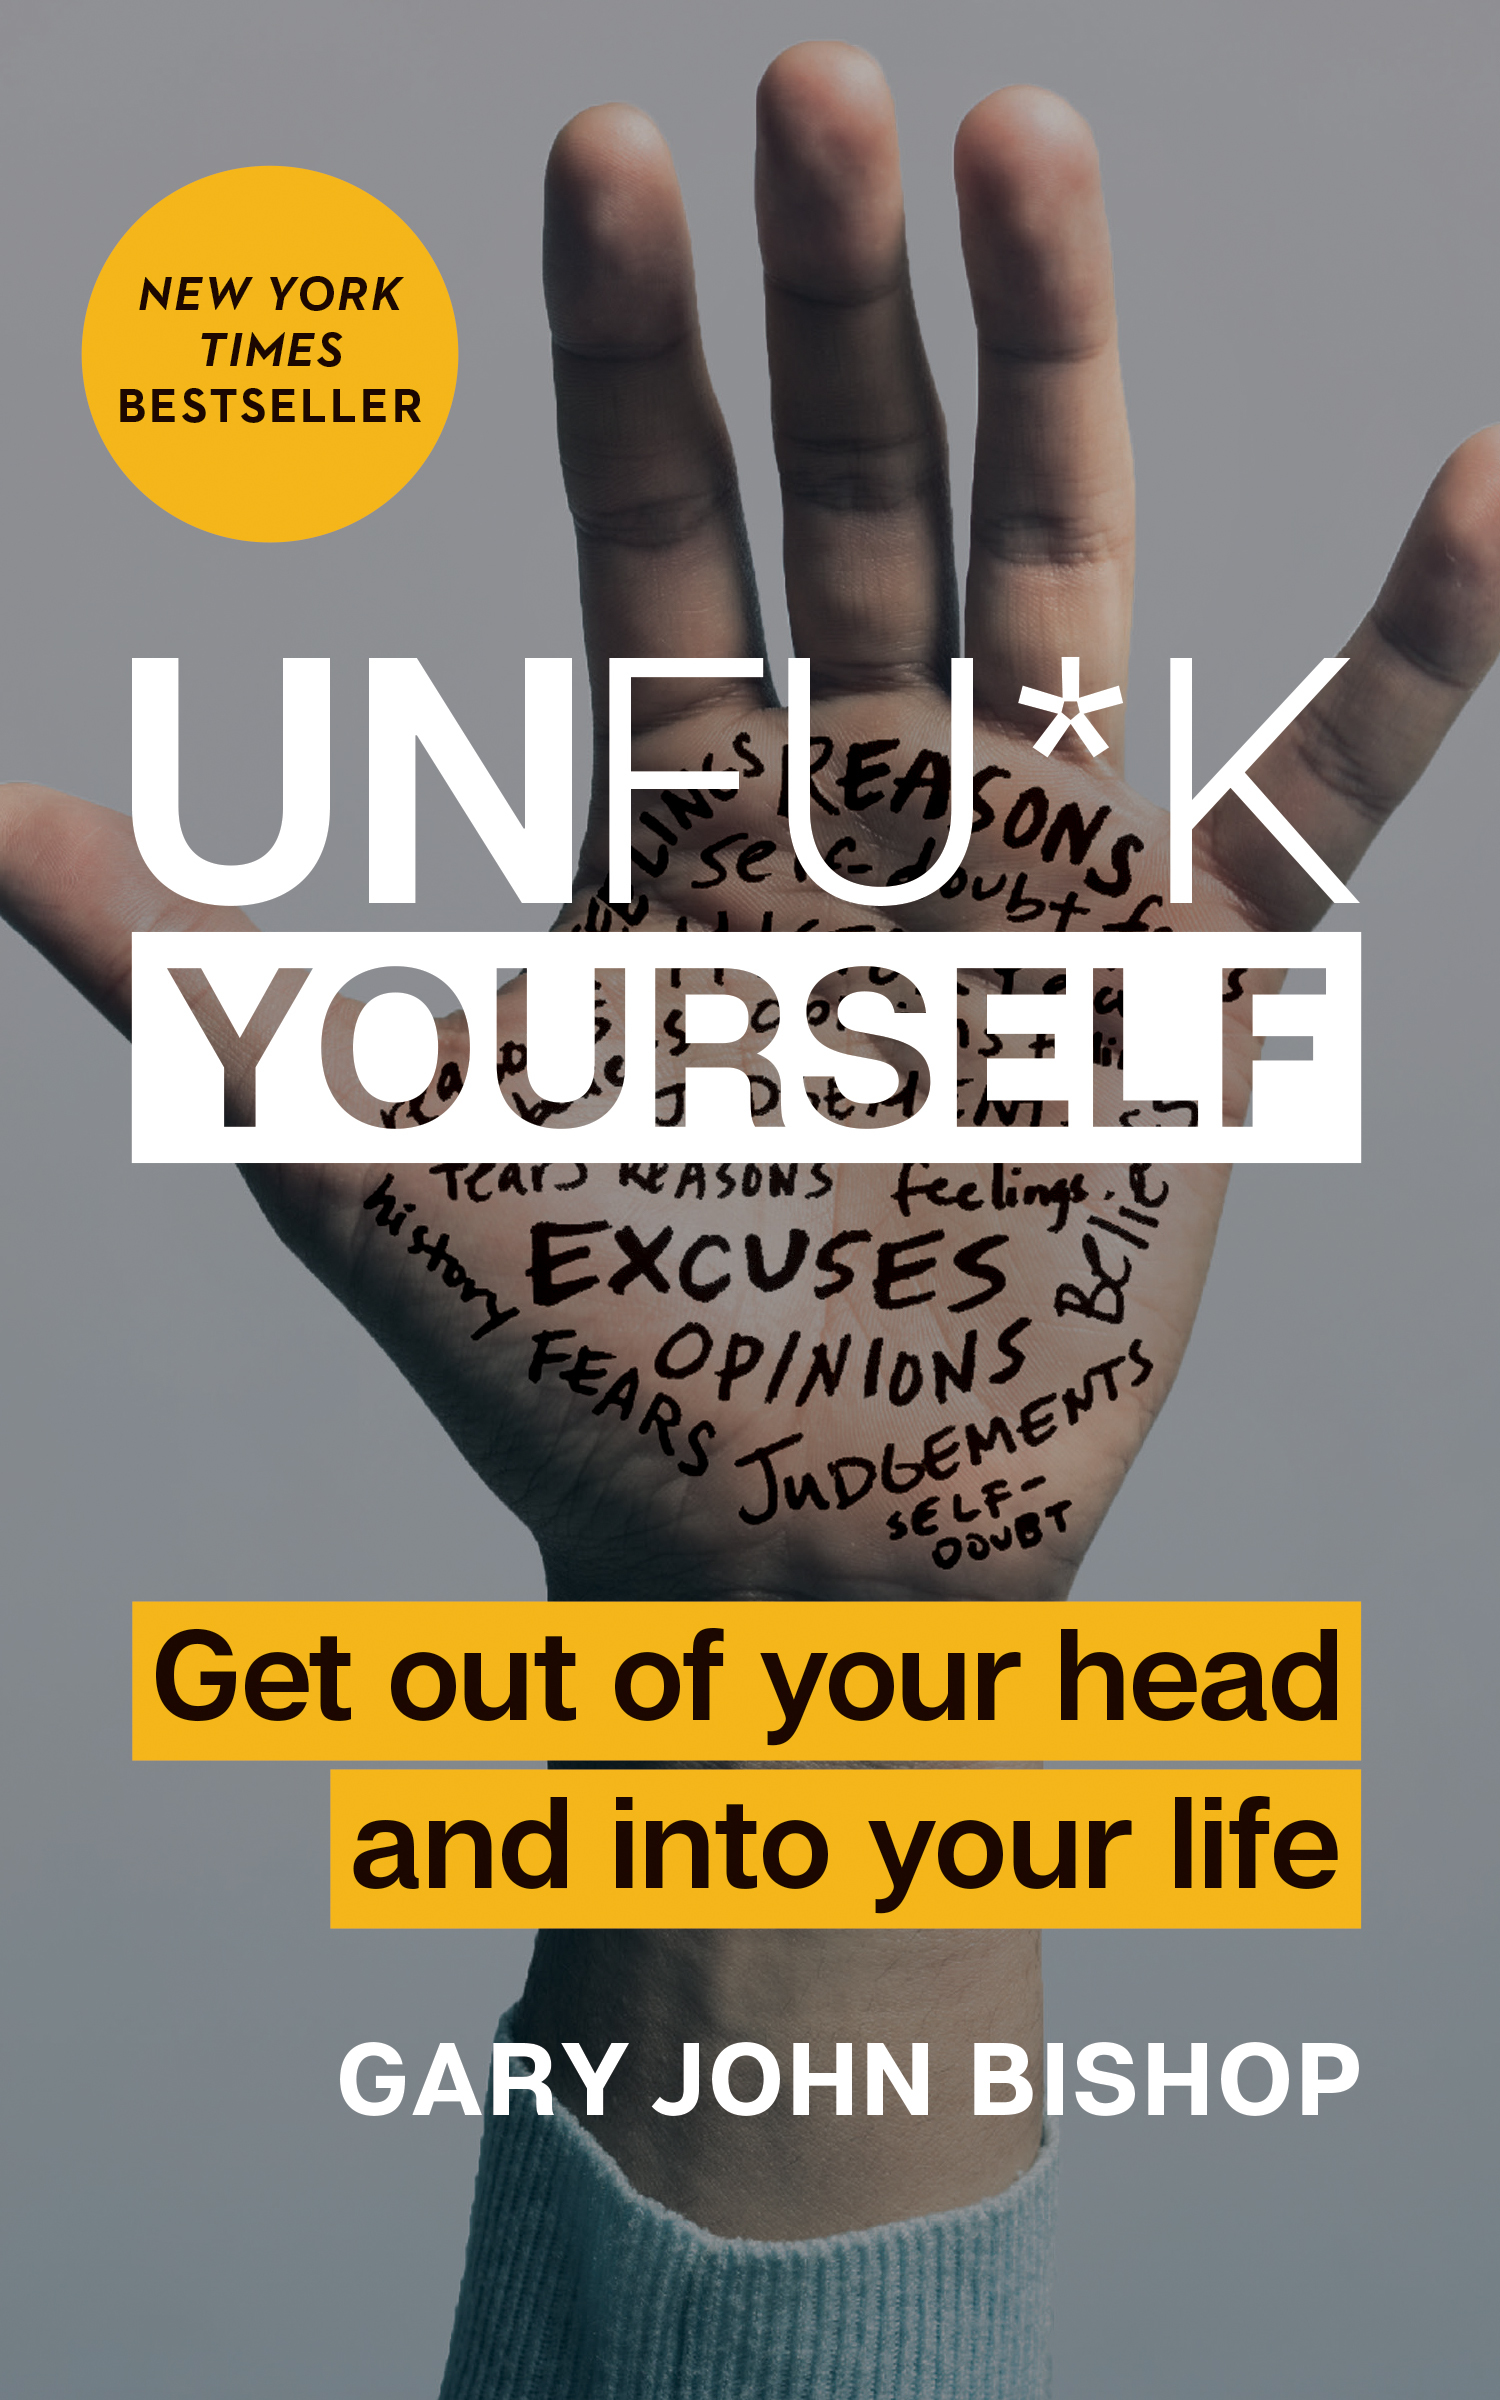 Unfu*k Yourself: Get Out of Your Head and Into Your Life book by Gary John Bishop